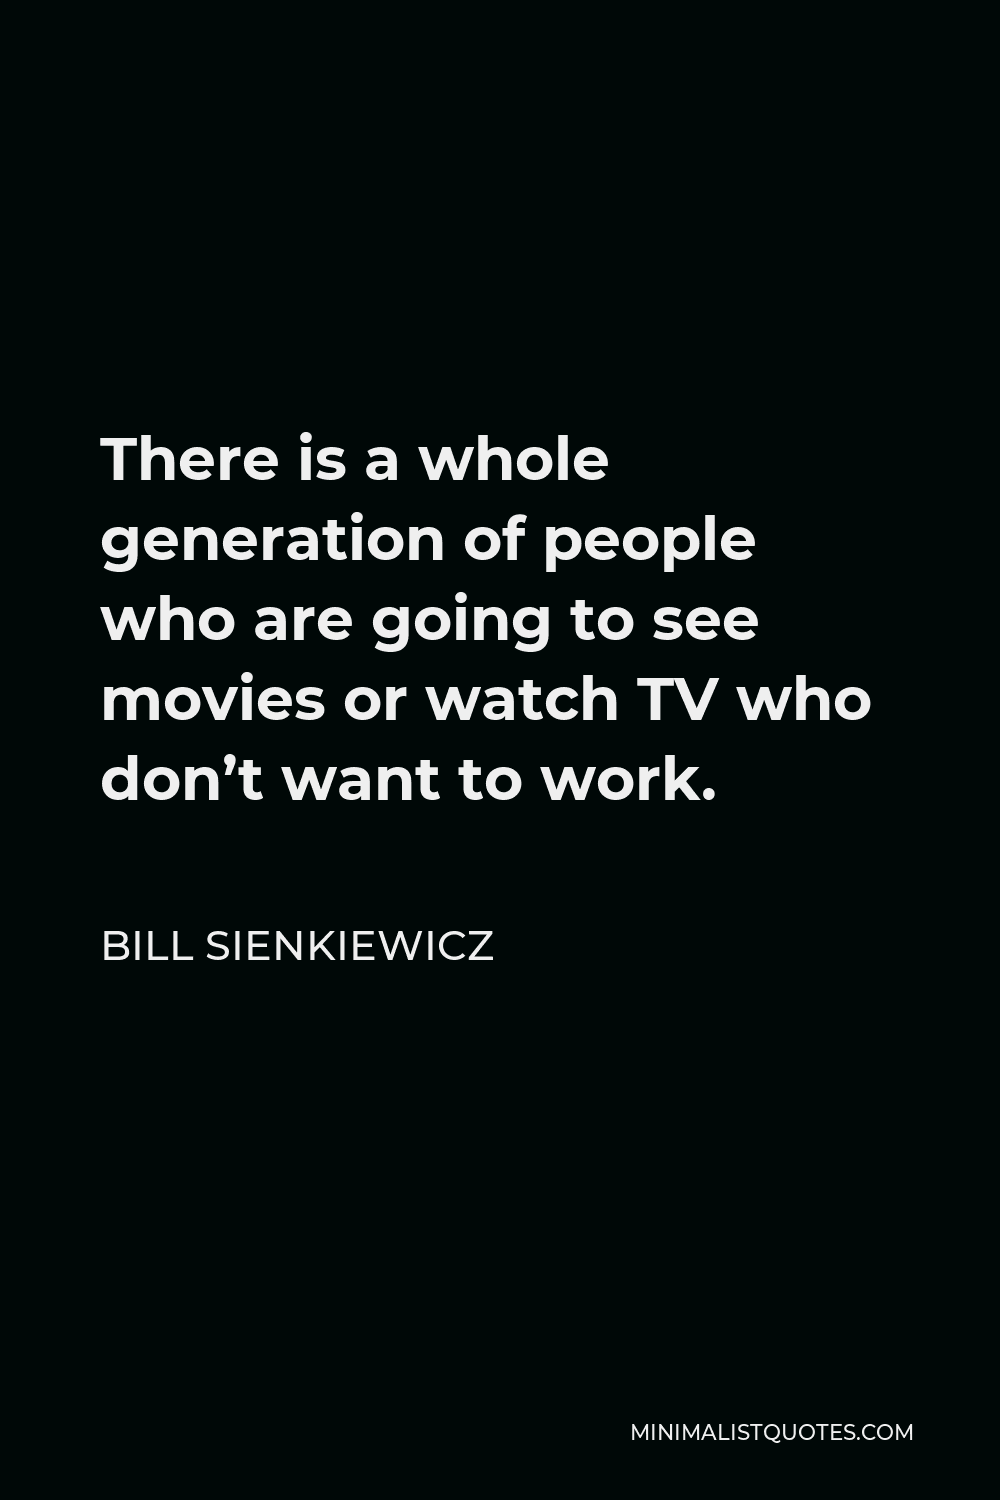 Bill Sienkiewicz Quote - There is a whole generation of people who are going to see movies or watch TV who don’t want to work.